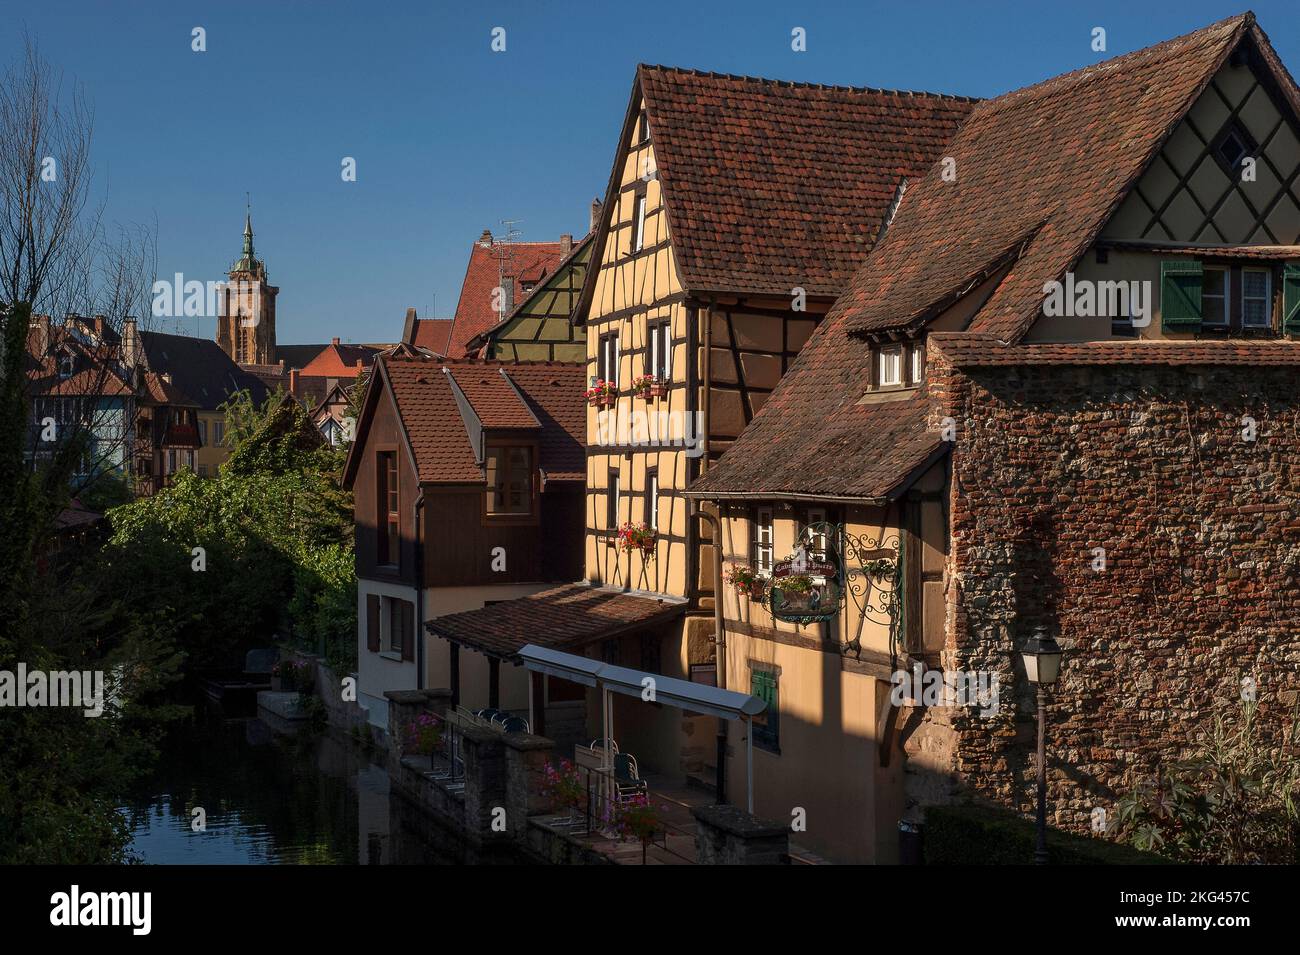 The Caveau Saint-Pierre restaurant, in a large 16th century typically Alsatian timber-framed house, offers waterfront dining beside the River Lauch in the picturesque Little Venice (La Petite Venise) area at Colmar, Alsace, Grand Est, France. Stock Photo